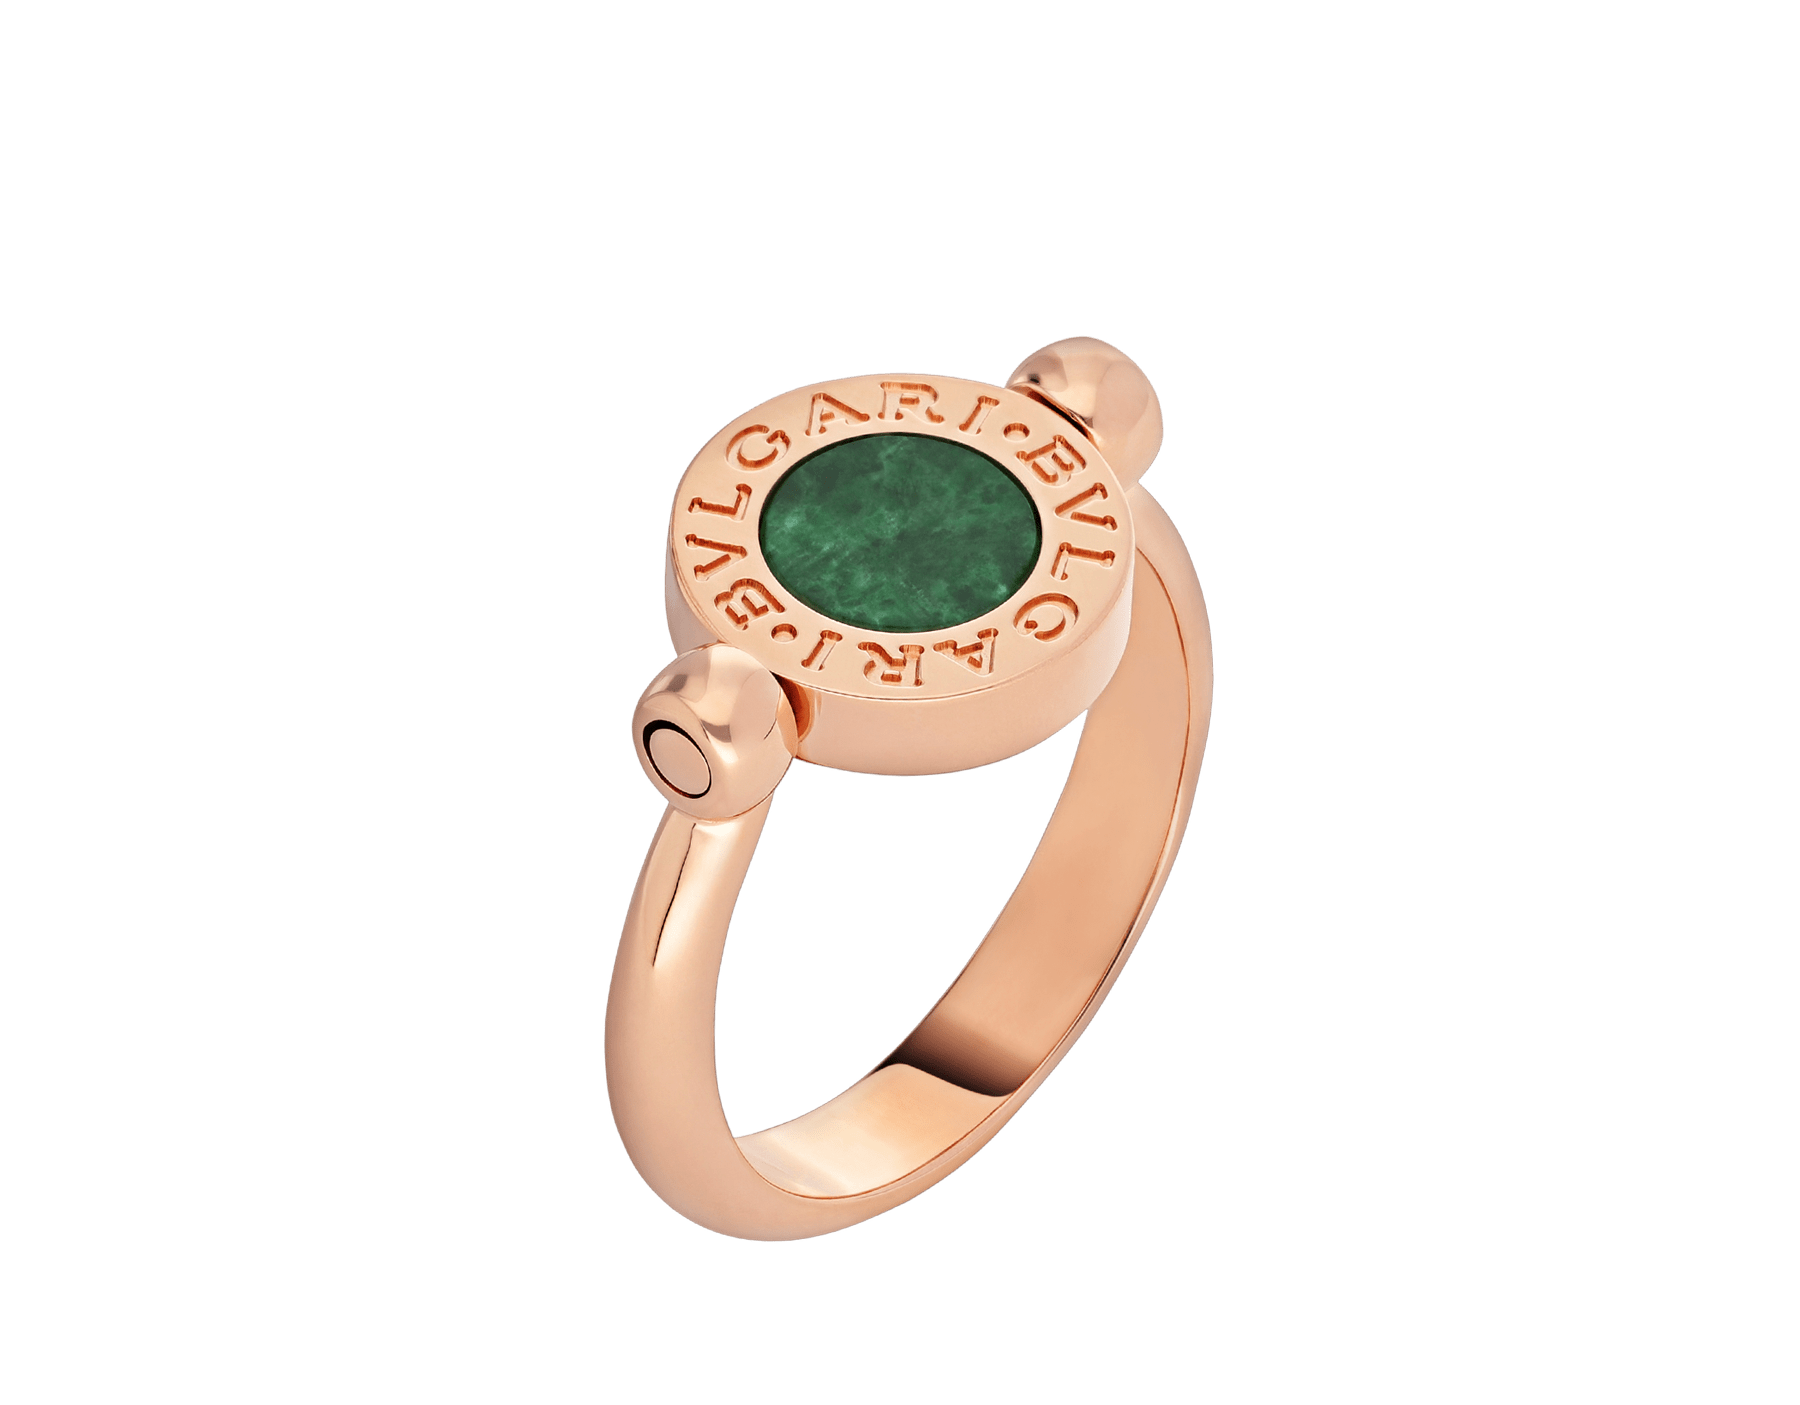 Grown from the Roman roots of the brand into an elegant fusion of culture and modernity, the BVLGARI BVLGARI ring is an effervescent, contemporary statement of classiness. The trademark double logo was initially inspired by the curved inscriptions on ancient coins, whilst today it has evolved into playful interpretations, framing multicoloured hard gemstones and pavé diamonds in one single jewel for a double wearability. <br> BVLGARI BVLGARI 18 kt rose gold flip ring with jade and pavé diamonds. AN859222 image 1